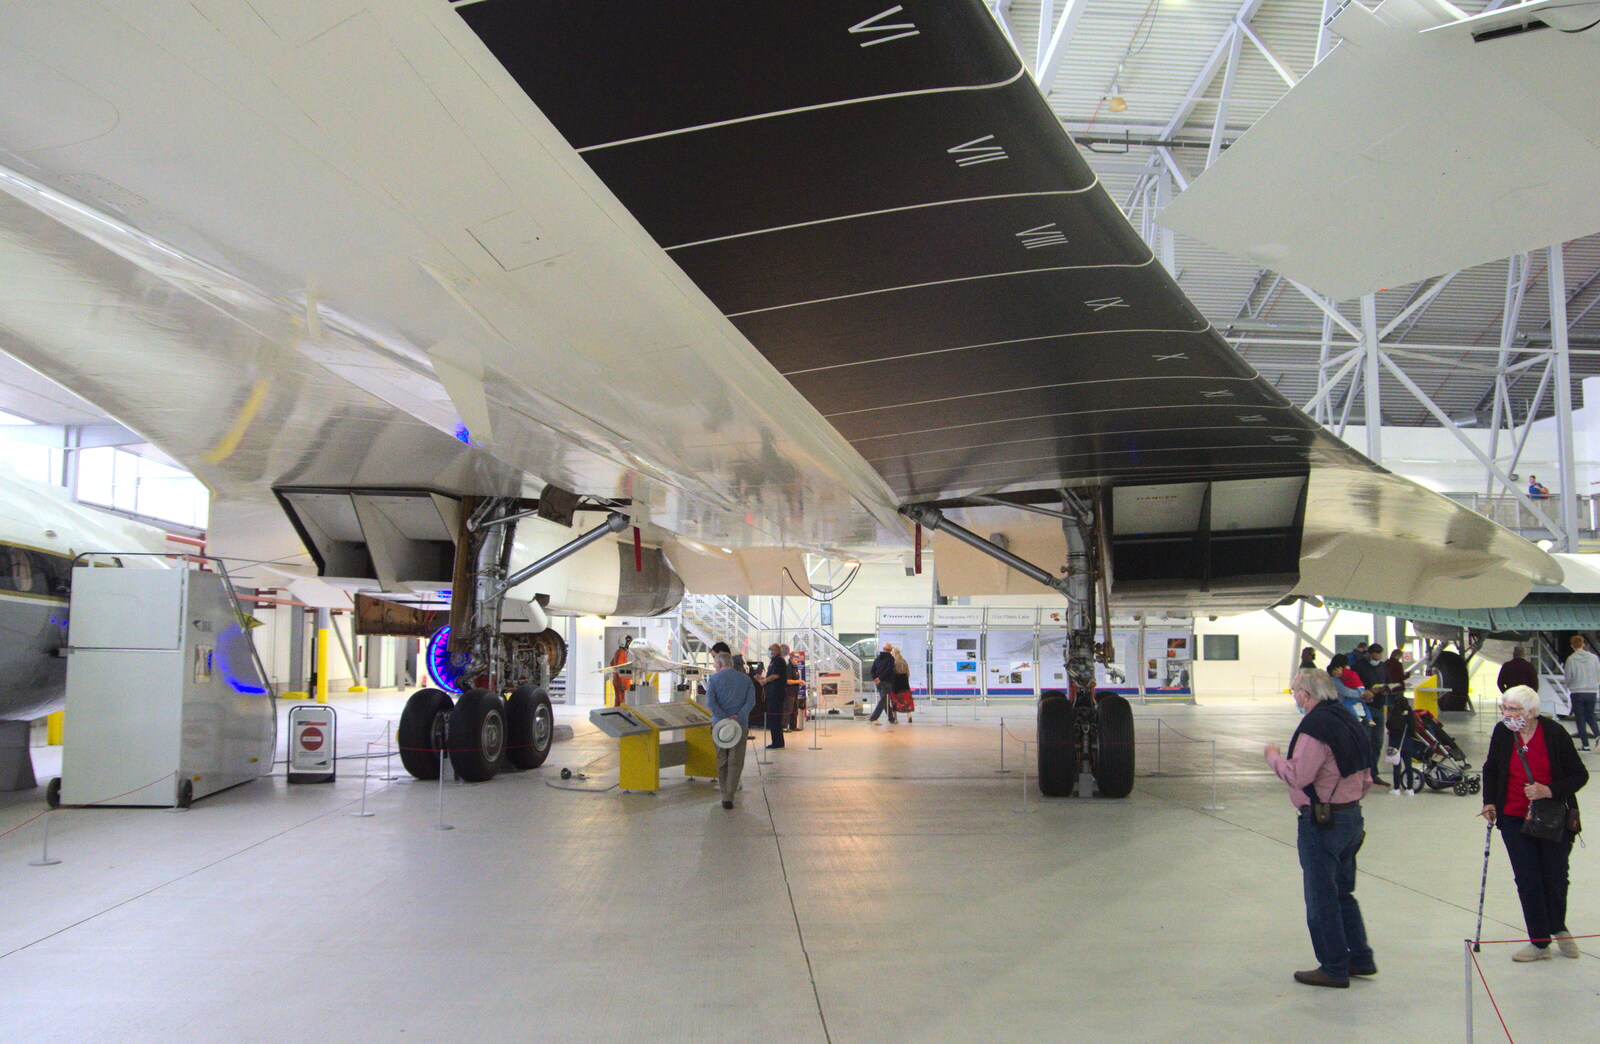 Under the wings of Concorde from The Duxford Dash, IWM Duxford, Cambridge - 13th September 2020